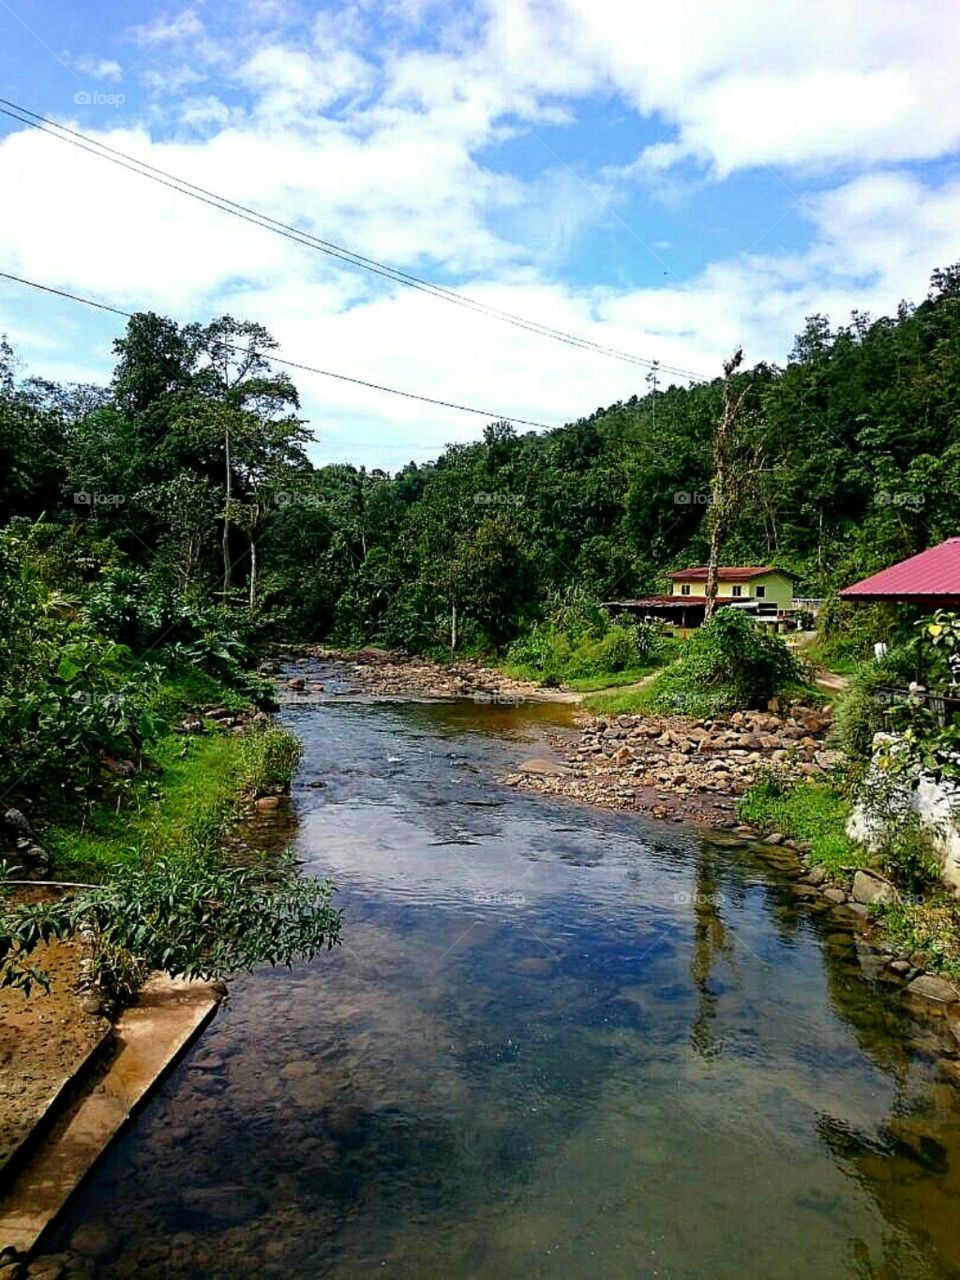 nature river flow, peace of mind. got homestay here